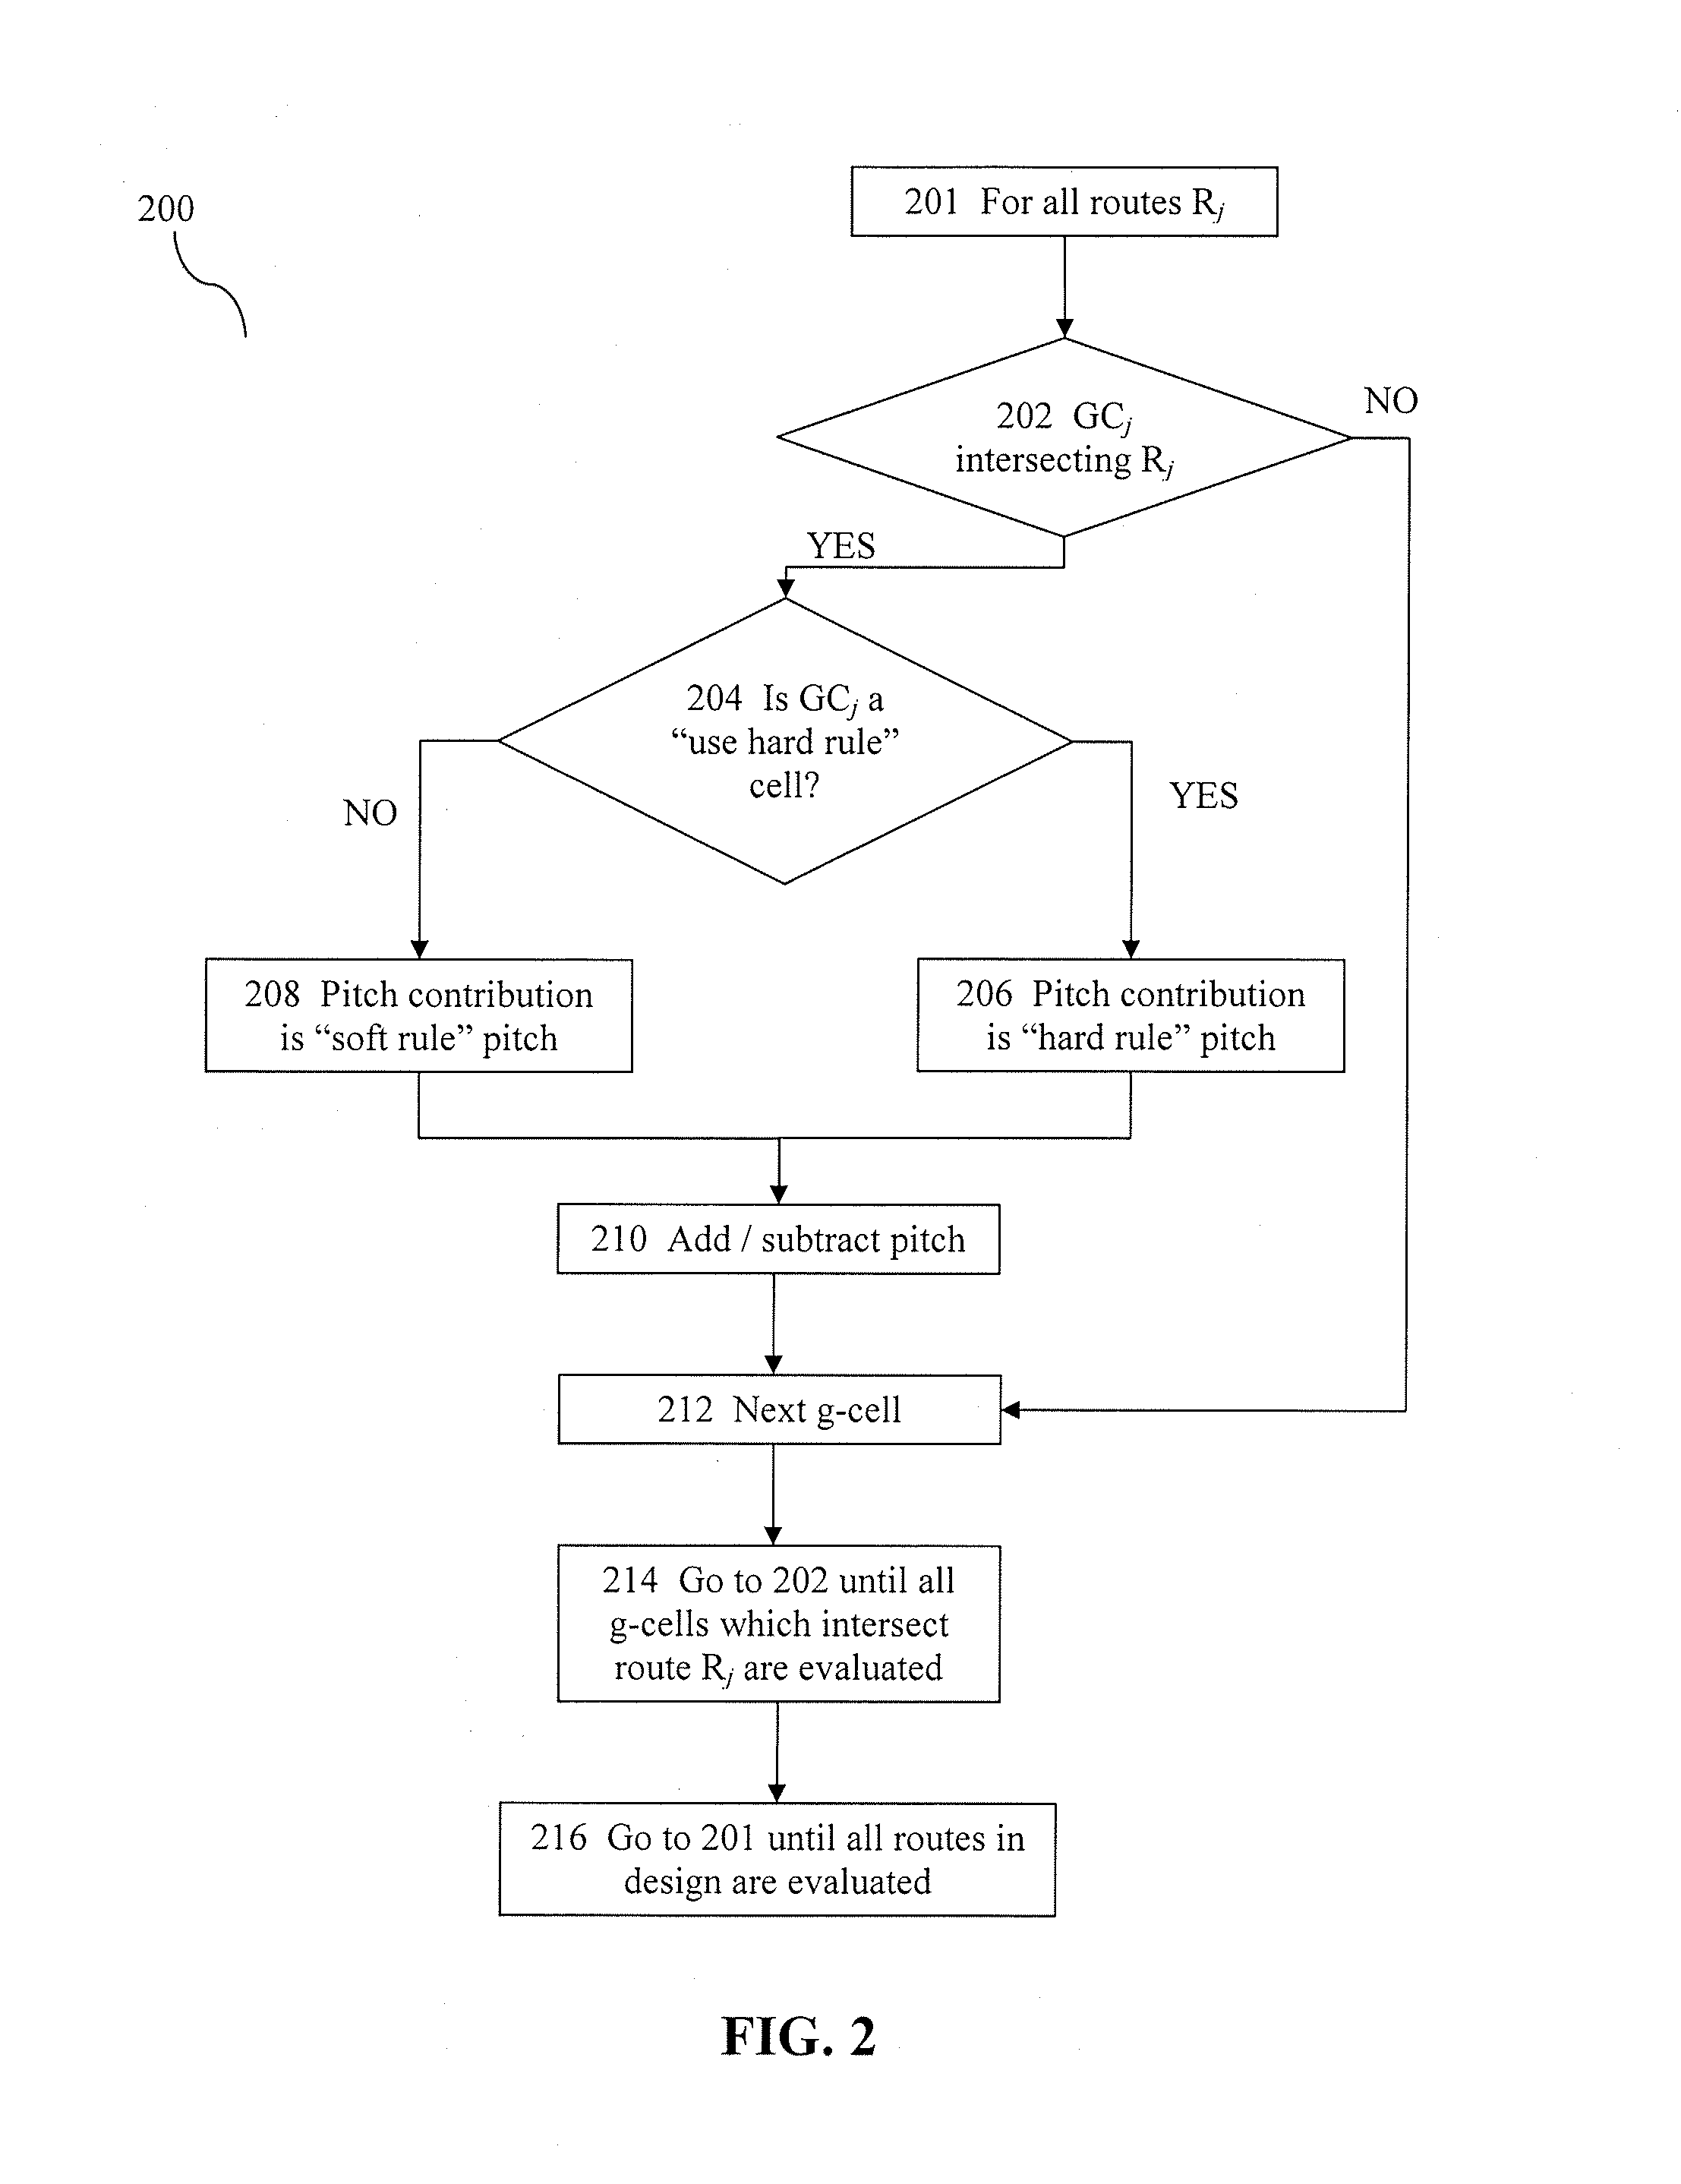 Method and system for determining hard and preferred rules in global routing of electronic designs